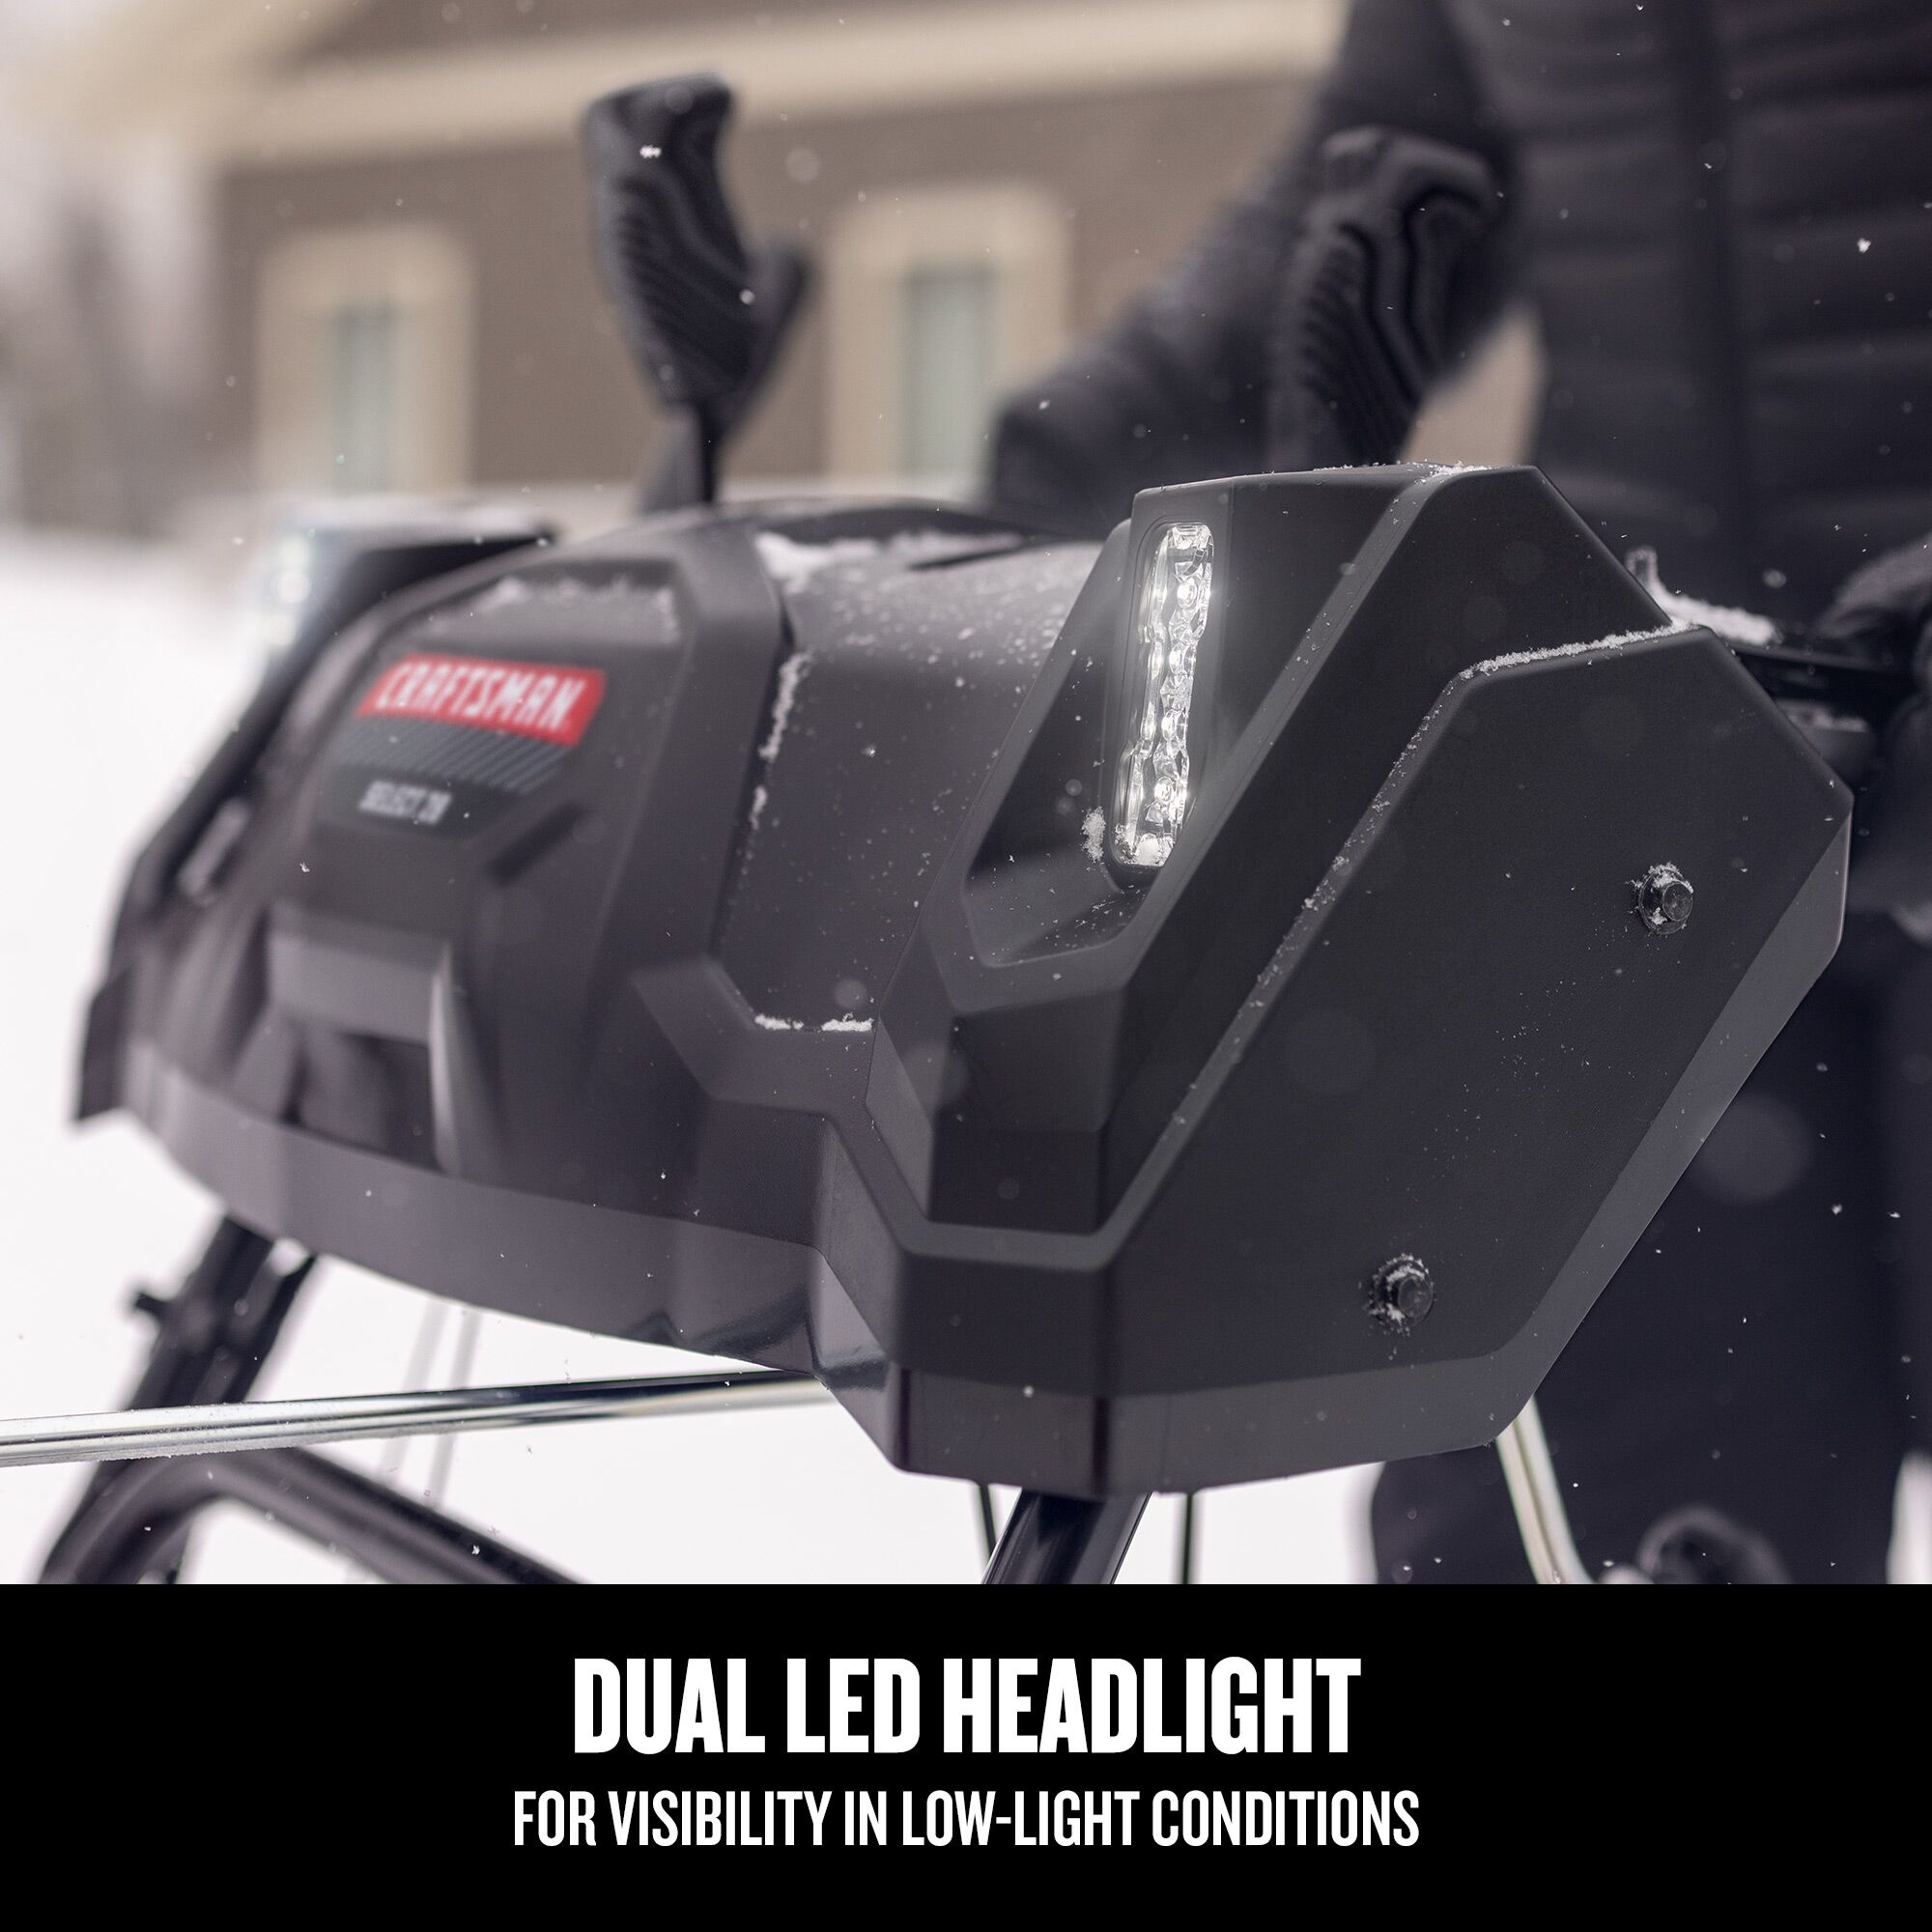 CRAFTSMAN 28-in. 272-cc Two Stage Gas Snow Blower focused in on dual led headlight